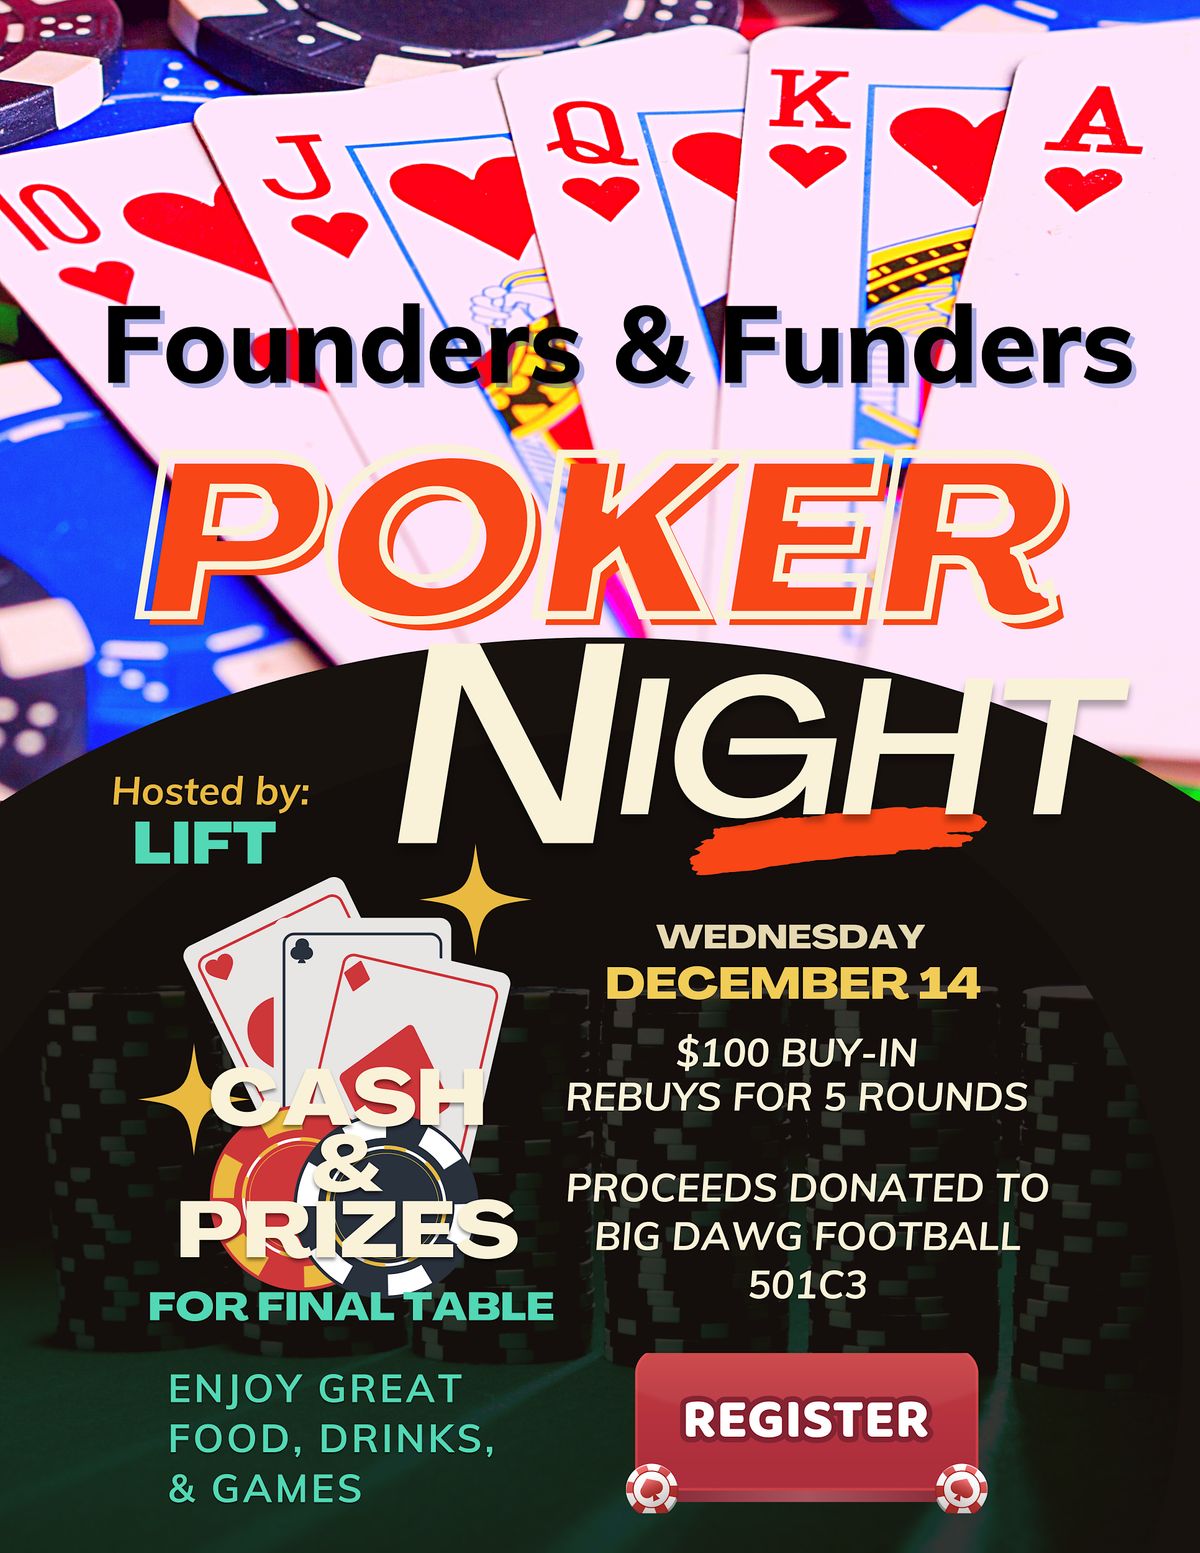 Founders & Funders Charity Poker Night